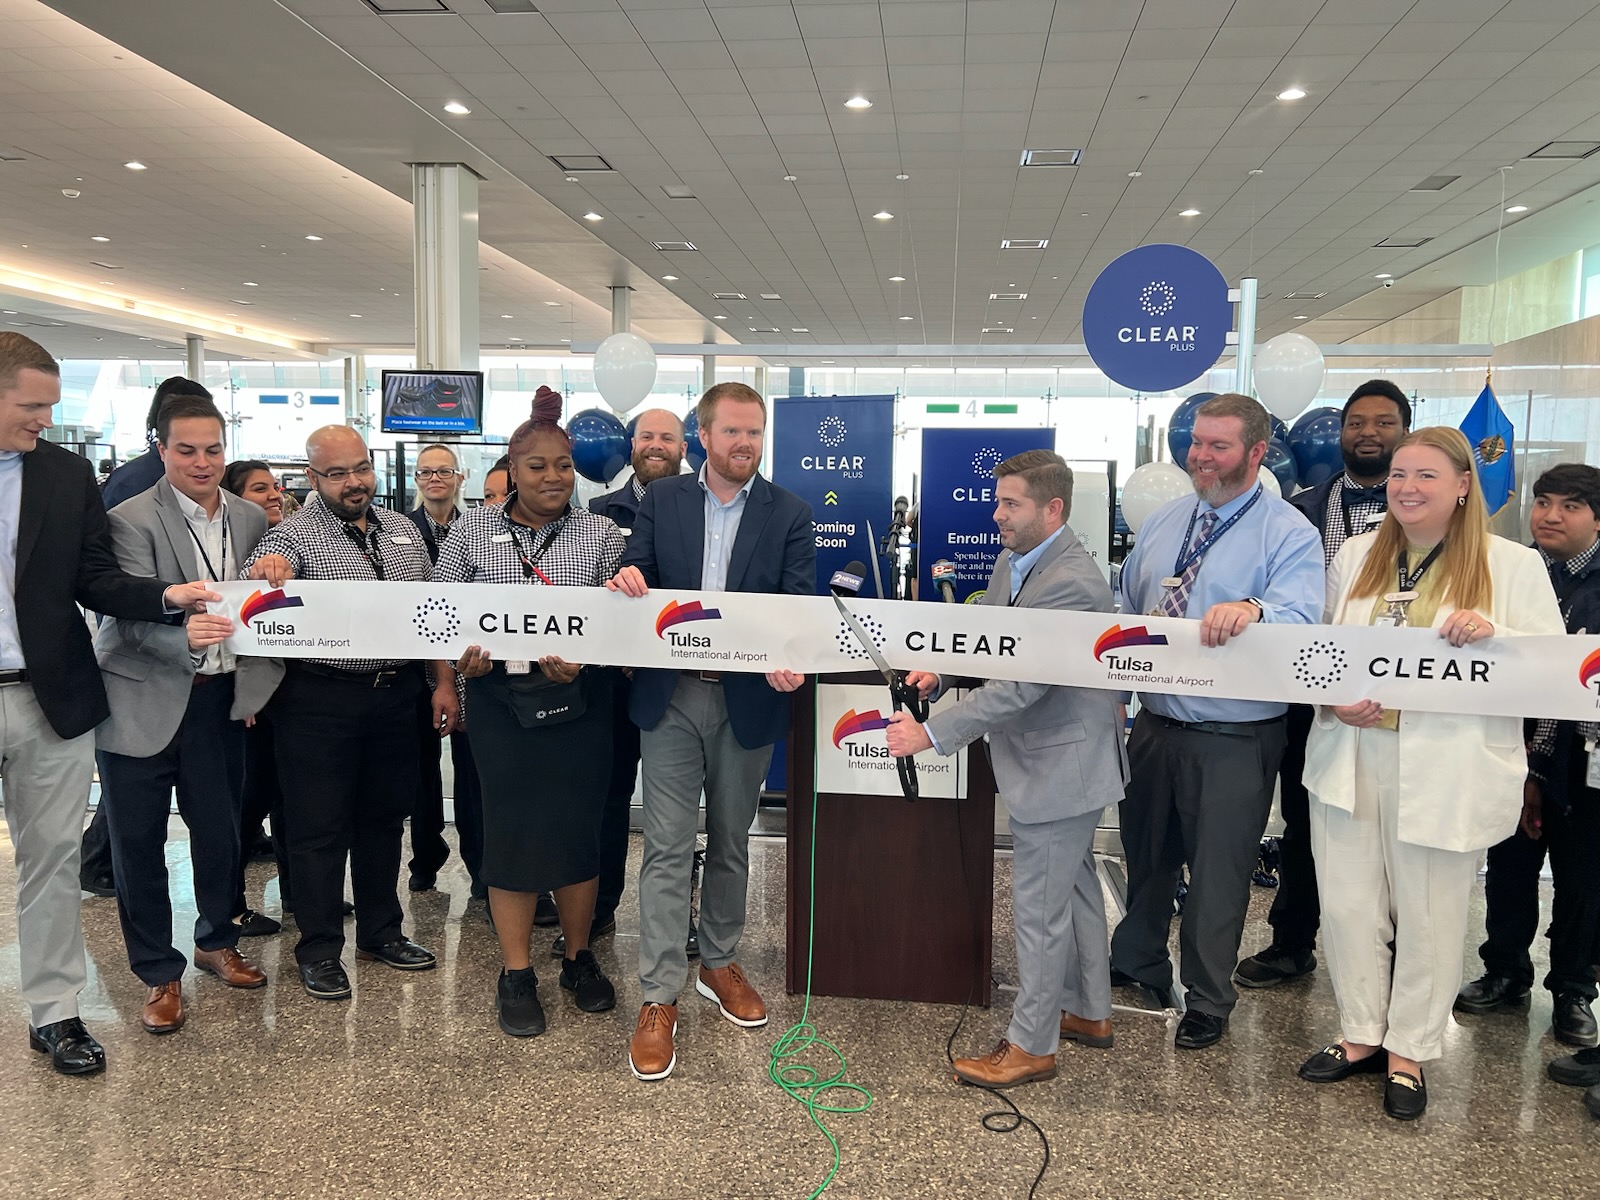 CLEAR and Tulsa International Airport Announce New Lane at TUL